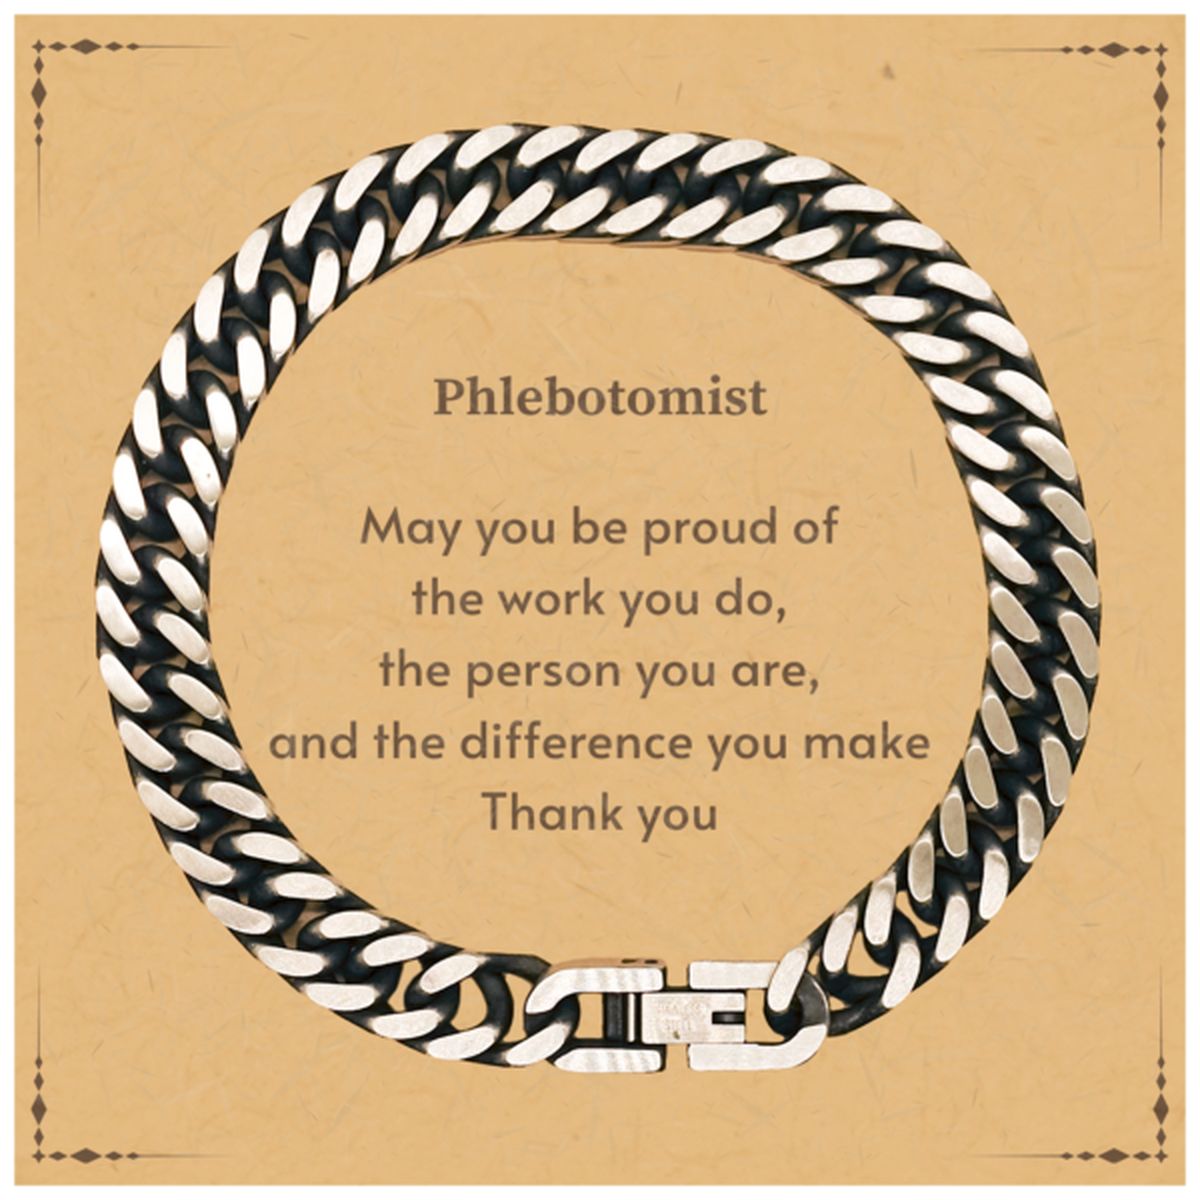 Heartwarming Cuban Link Chain Bracelet Retirement Coworkers Gifts for Phlebotomist, Phlebotomist May You be proud of the work you do, the person you are Gifts for Boss Men Women Friends